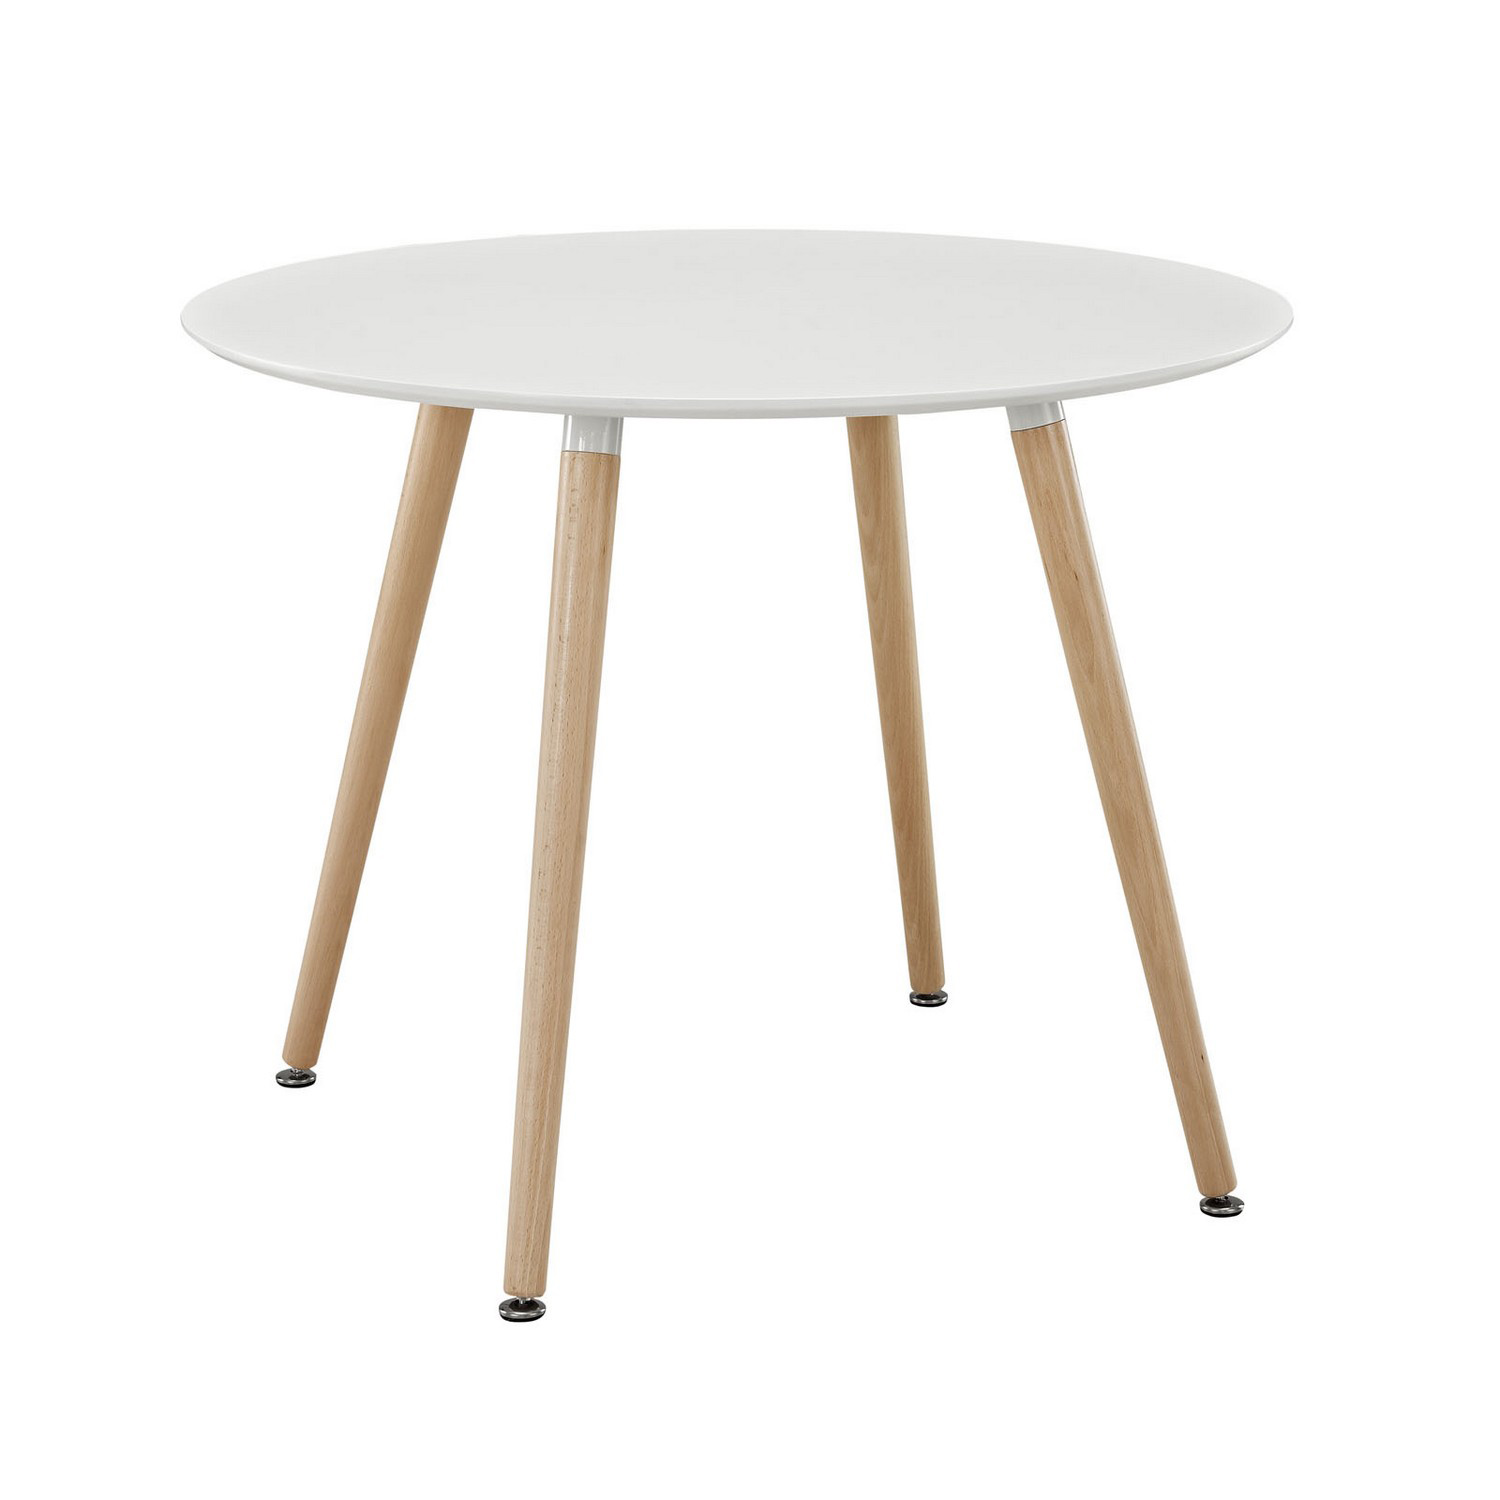 Modway Track Circular Dining Table - White